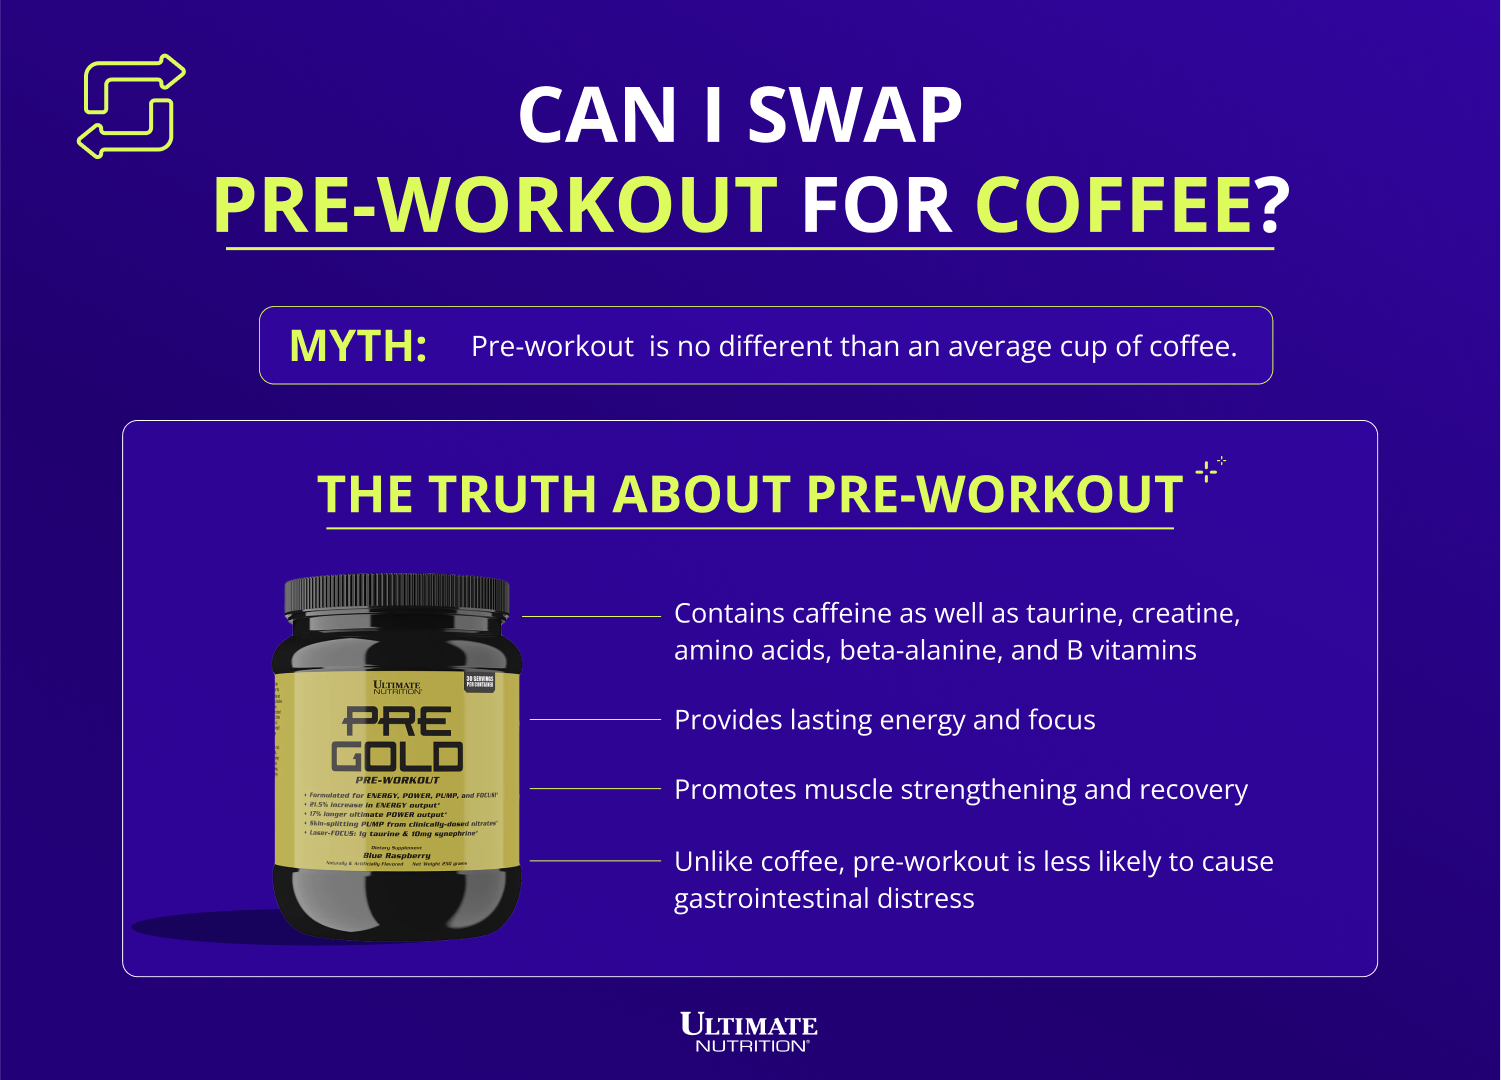 The truth about a Pre-Workout